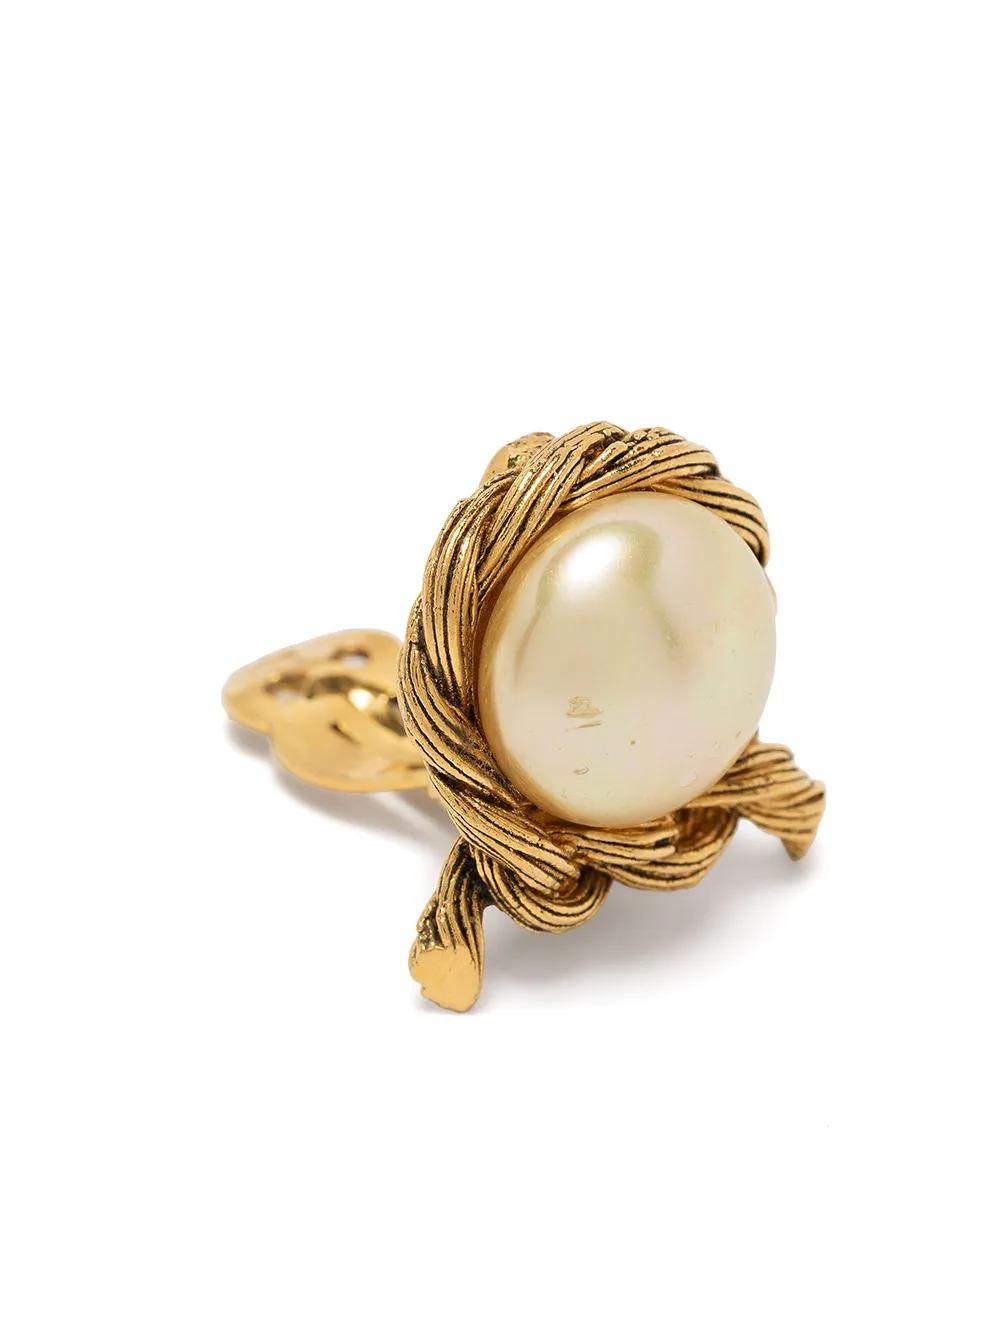 Add a little sophistication to your look with this pair of earrings by Chanel, crafted in France from gold-toned brass hardware. These earrings feature a luminous faux-pearl embellishment for optimum elegance and finished with a comfortable, rear